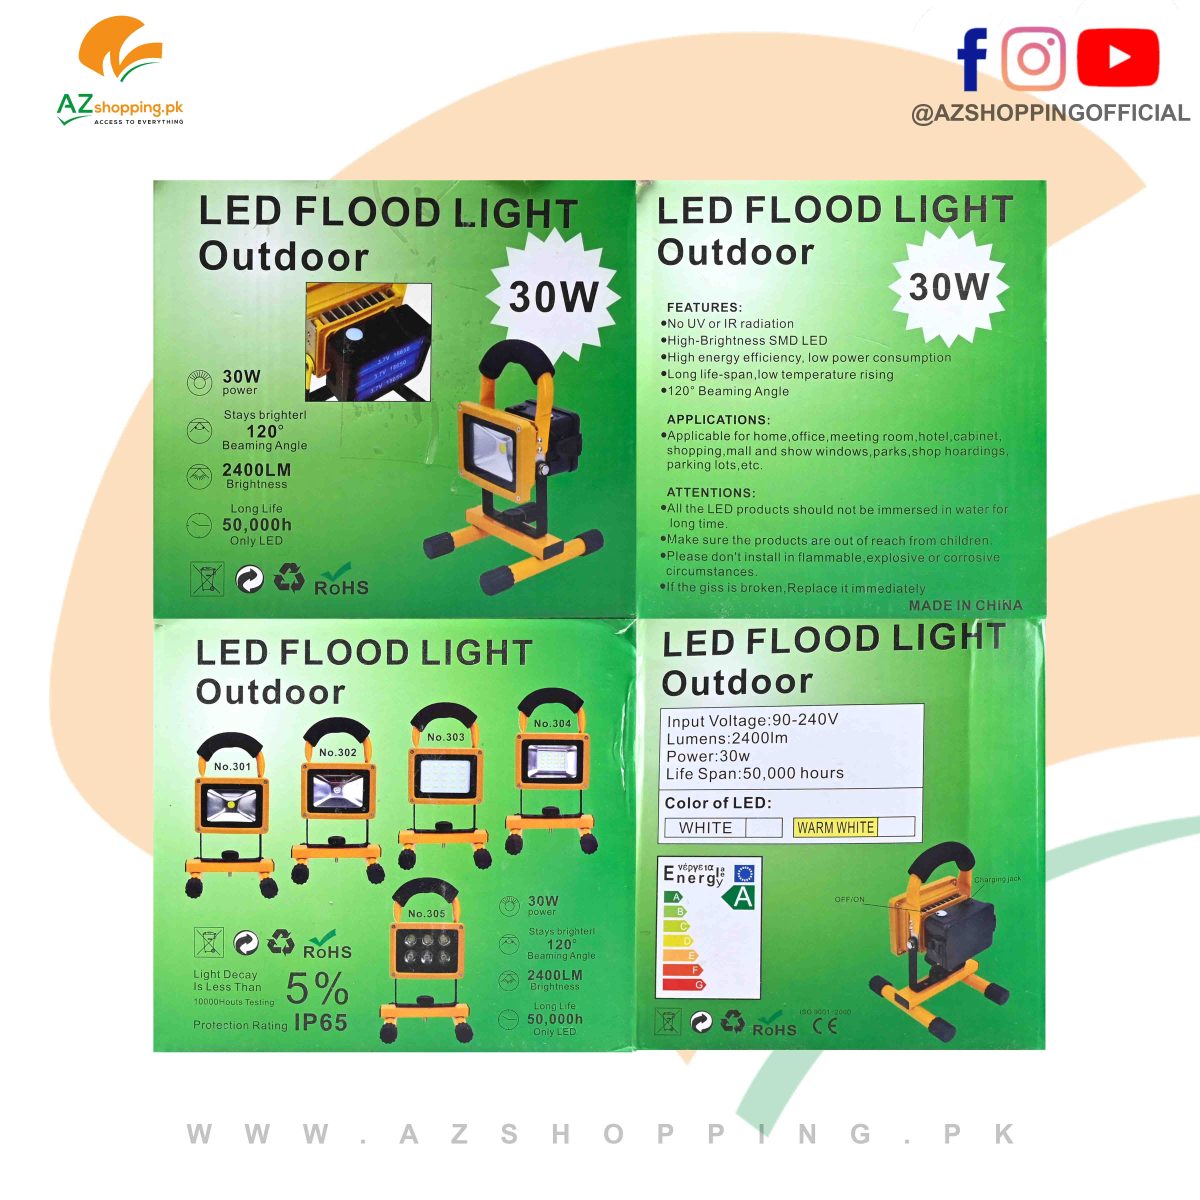 24 Led Flood Light Outdoor Lamp 30W with Carrying Handle & Stand, Waterproof IP65 & 3 Modes of Lights – Power Bank Output - Model: No.305